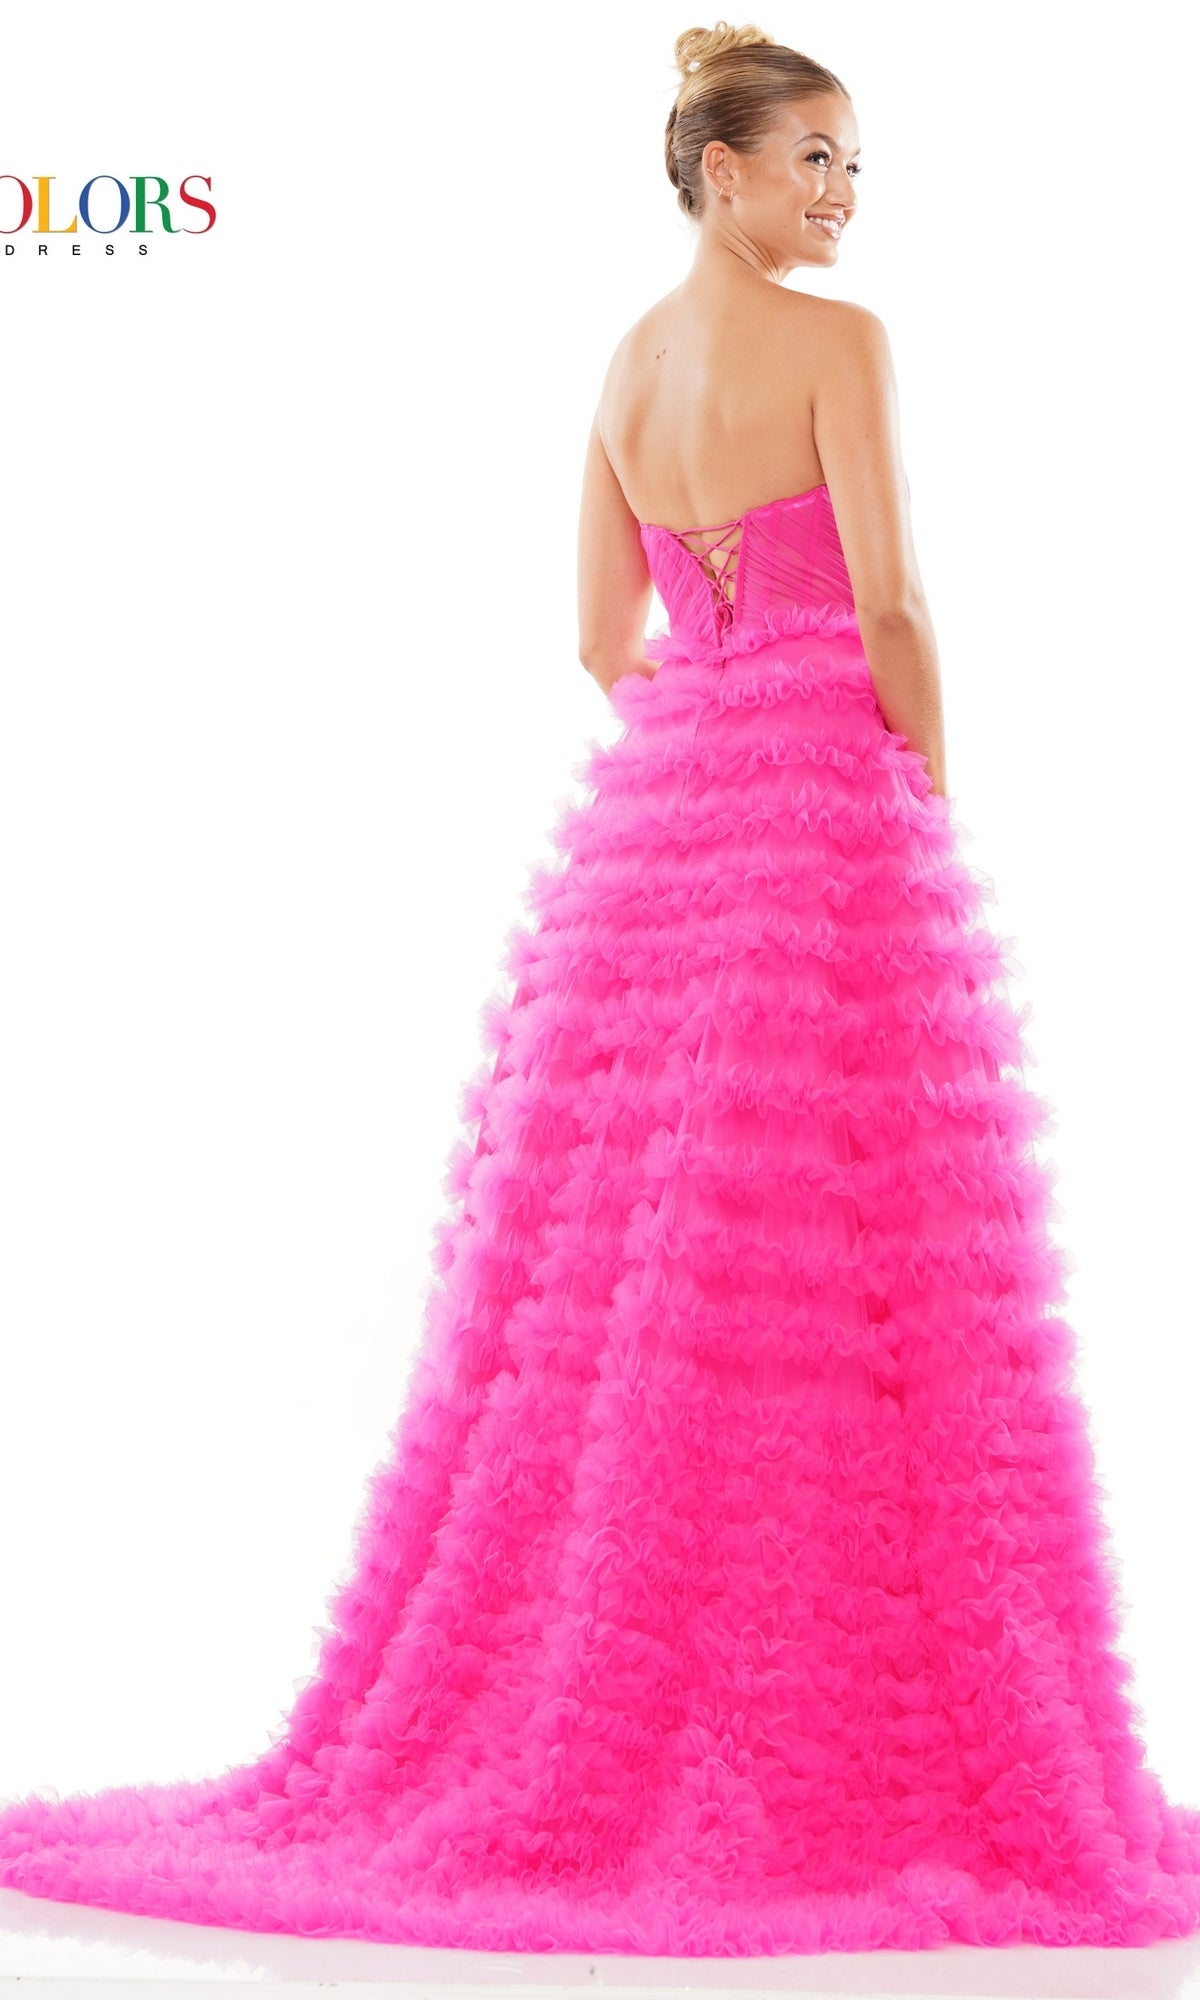 Strapless Long Ruffled Prom Ball Gown 3184